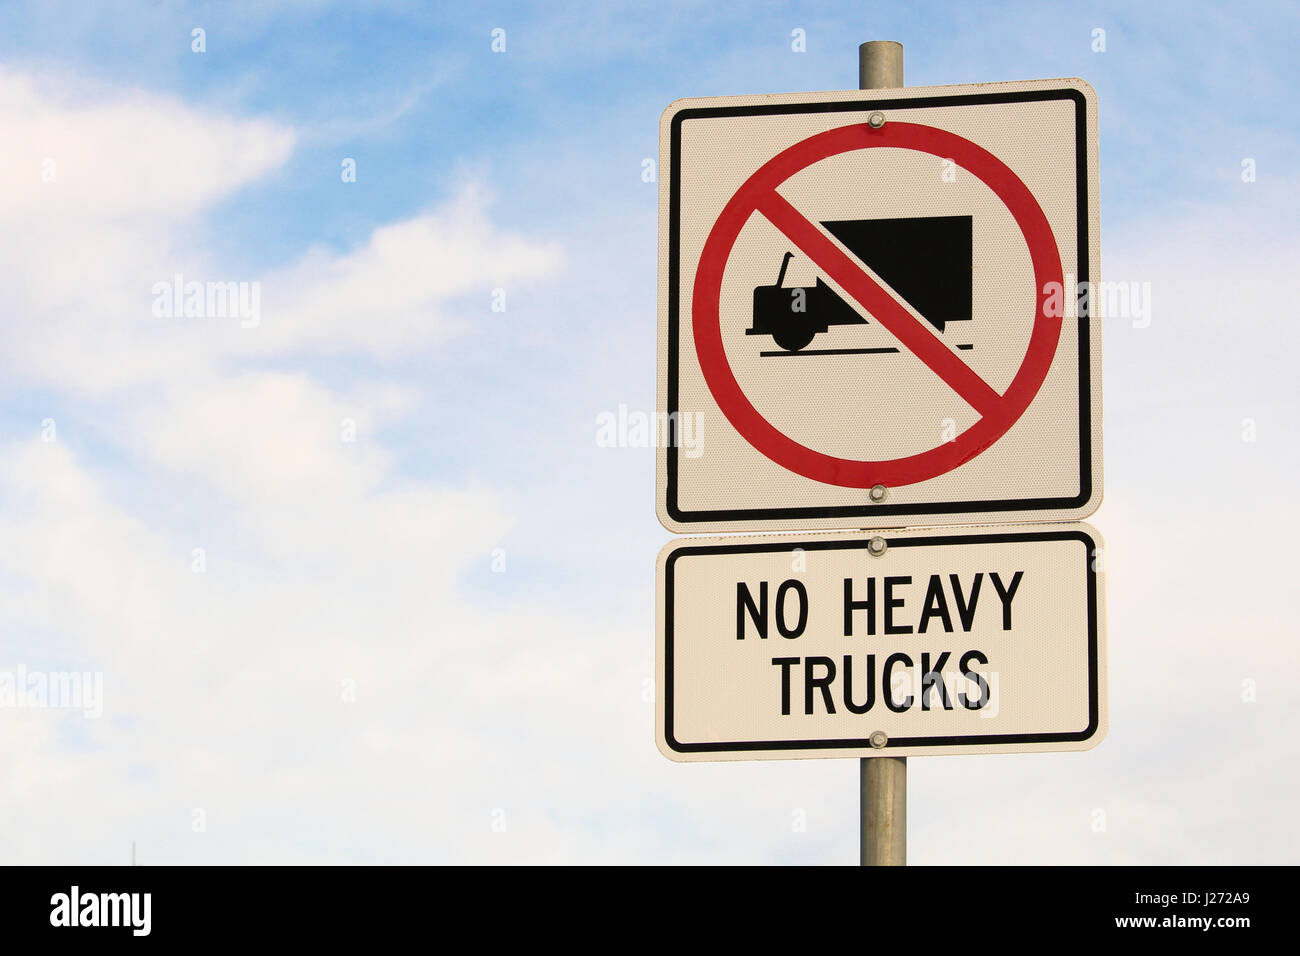 No Heavy Trucks Sign against Cloudy Blue Sky Background. Stock Photo